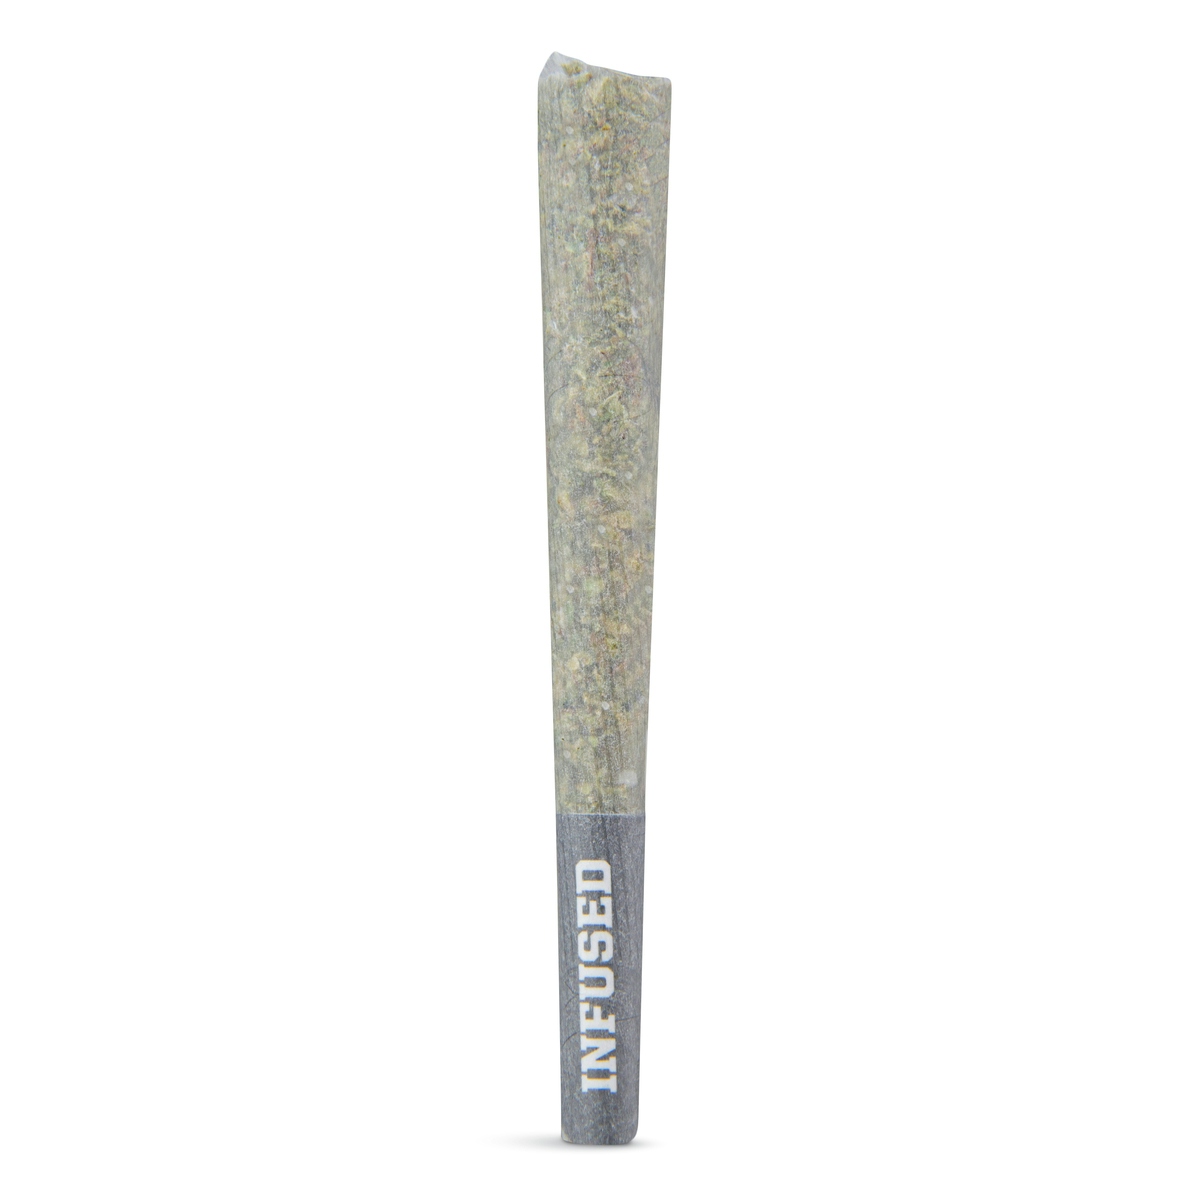 Shipwreck | Sativa - Diamond THCA-Infused Pre-Roll - 1G Joint